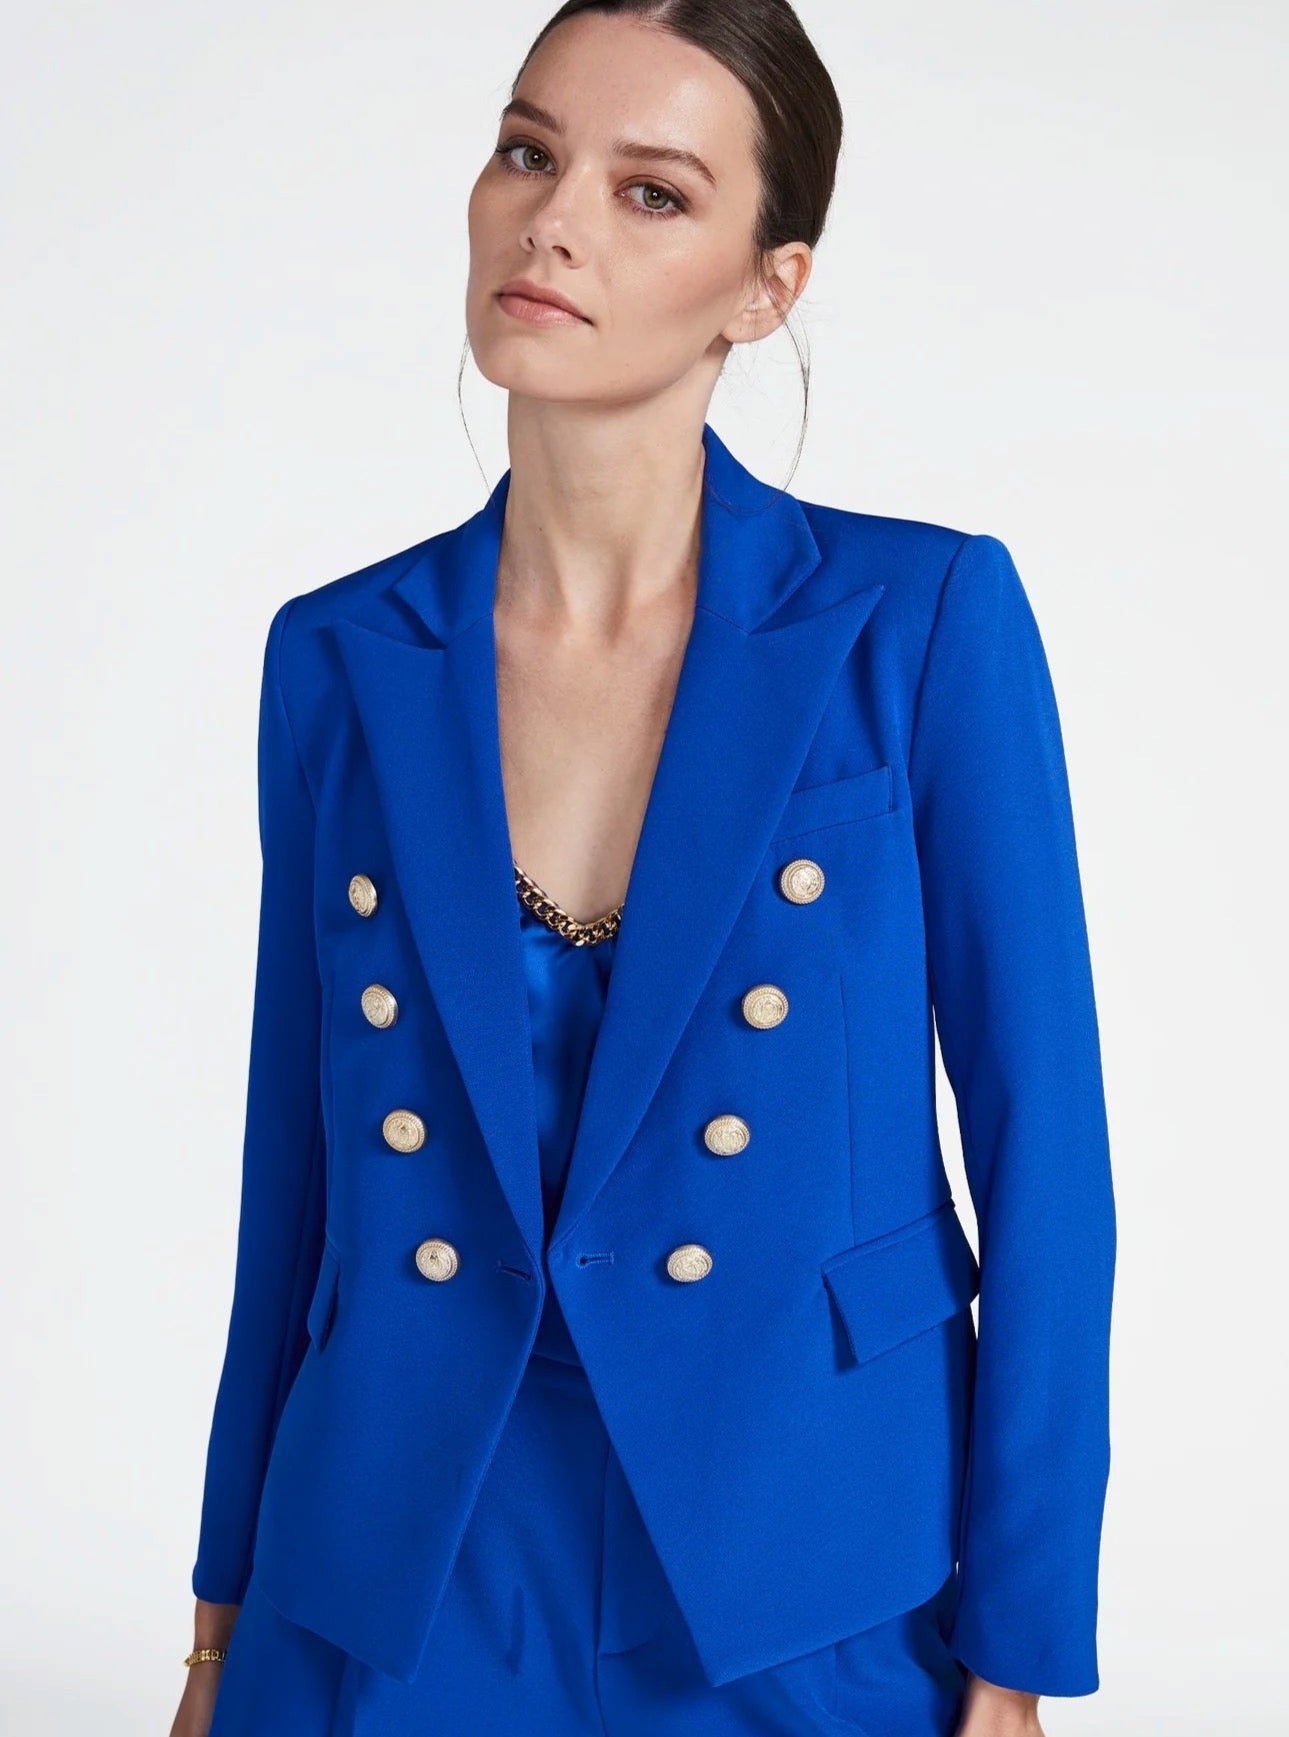 Generation Love Delilah Crepe Blazer in Royal Blue - Size M Available